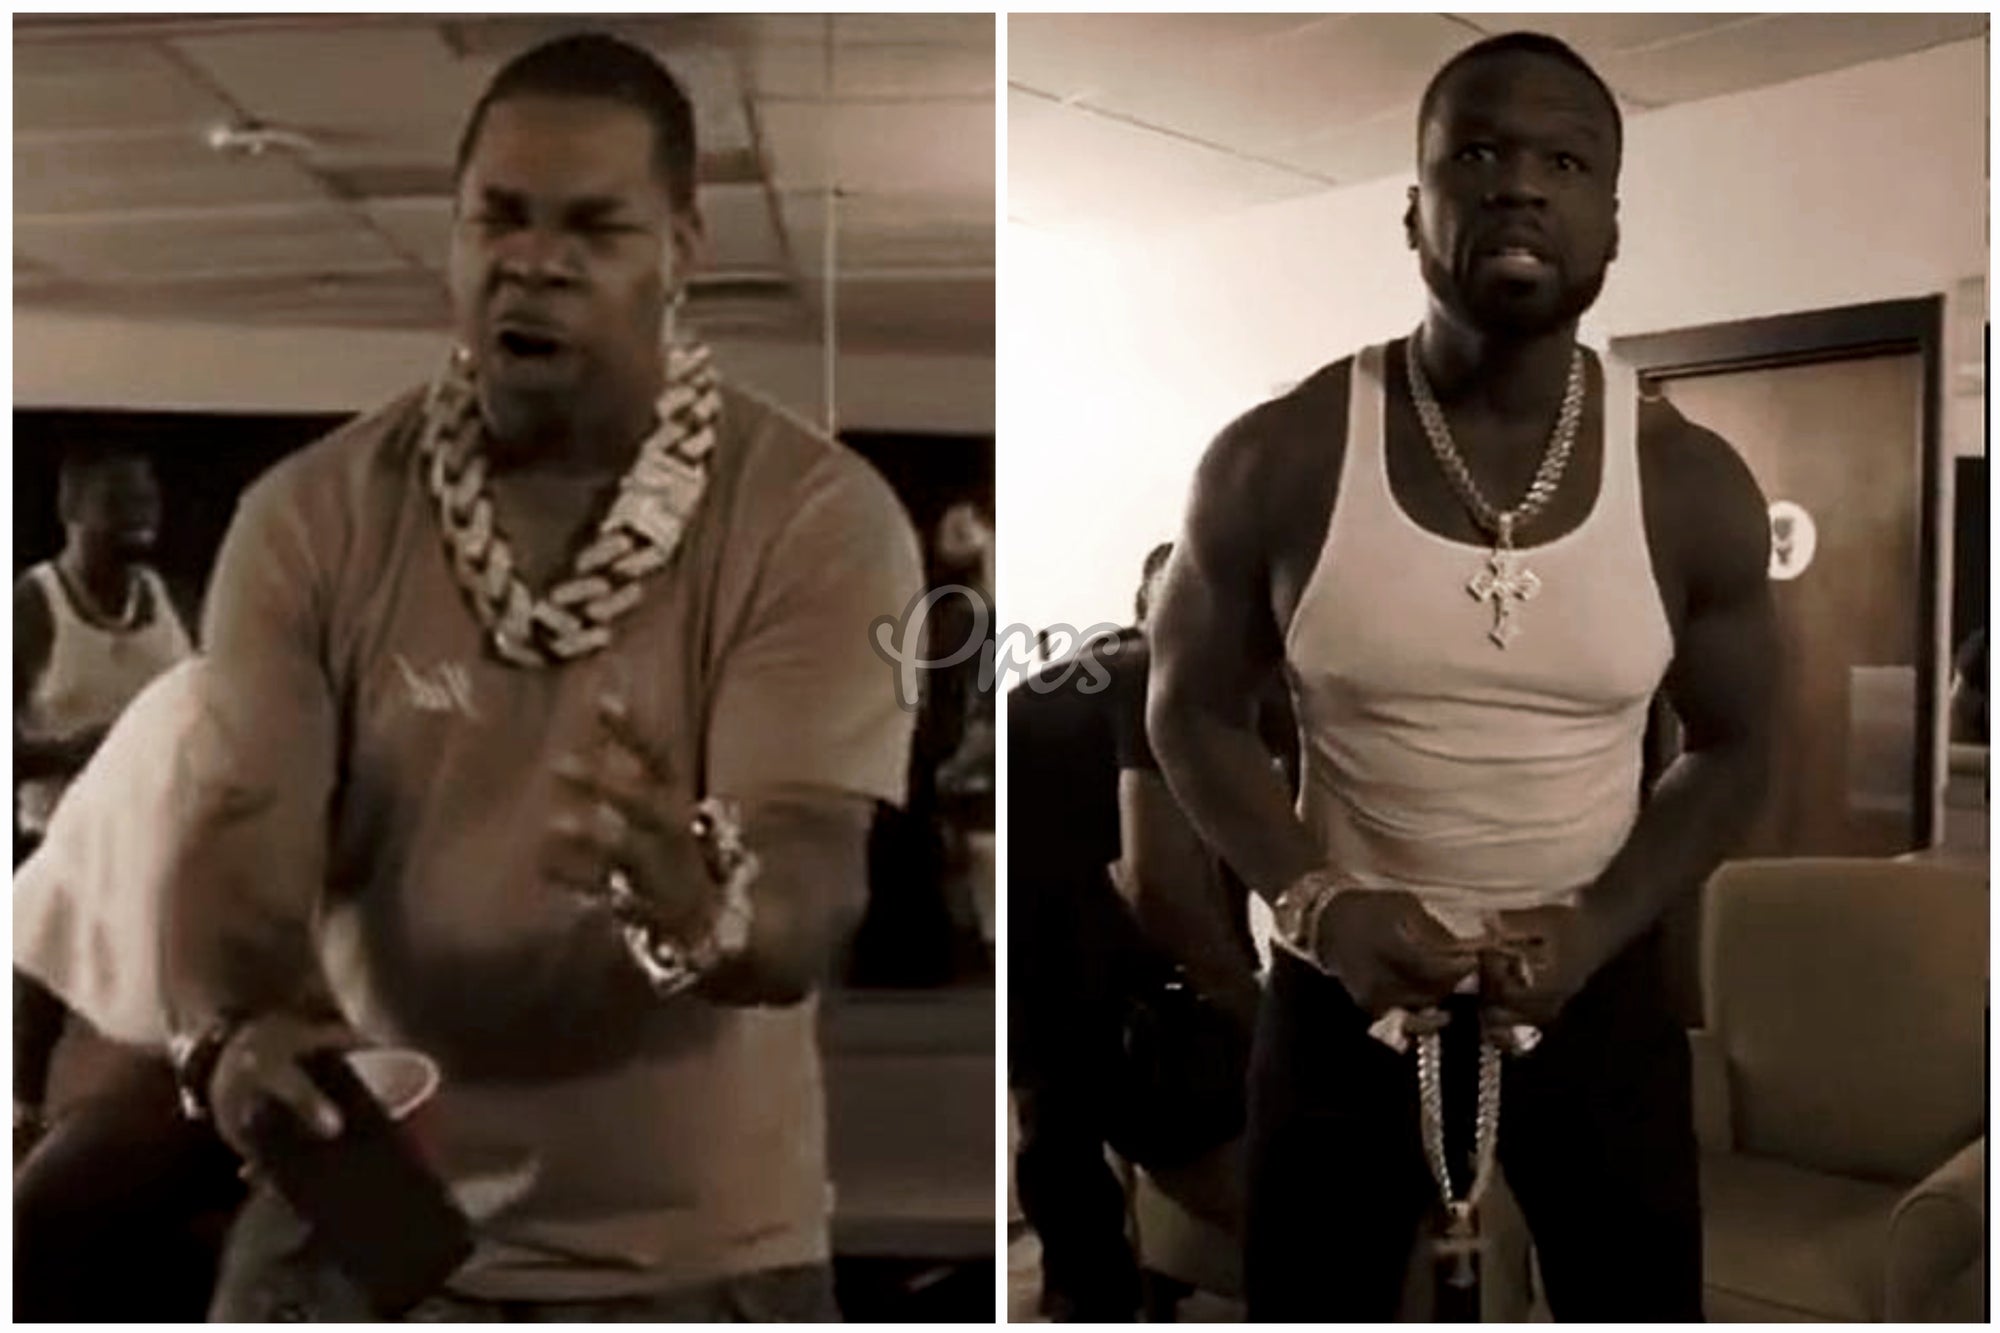 50 Cent Clowning Busta Rhymes And Tells That His Chain Is Too Big 'Bro Someone Had To Tell It' - Gold Presidents